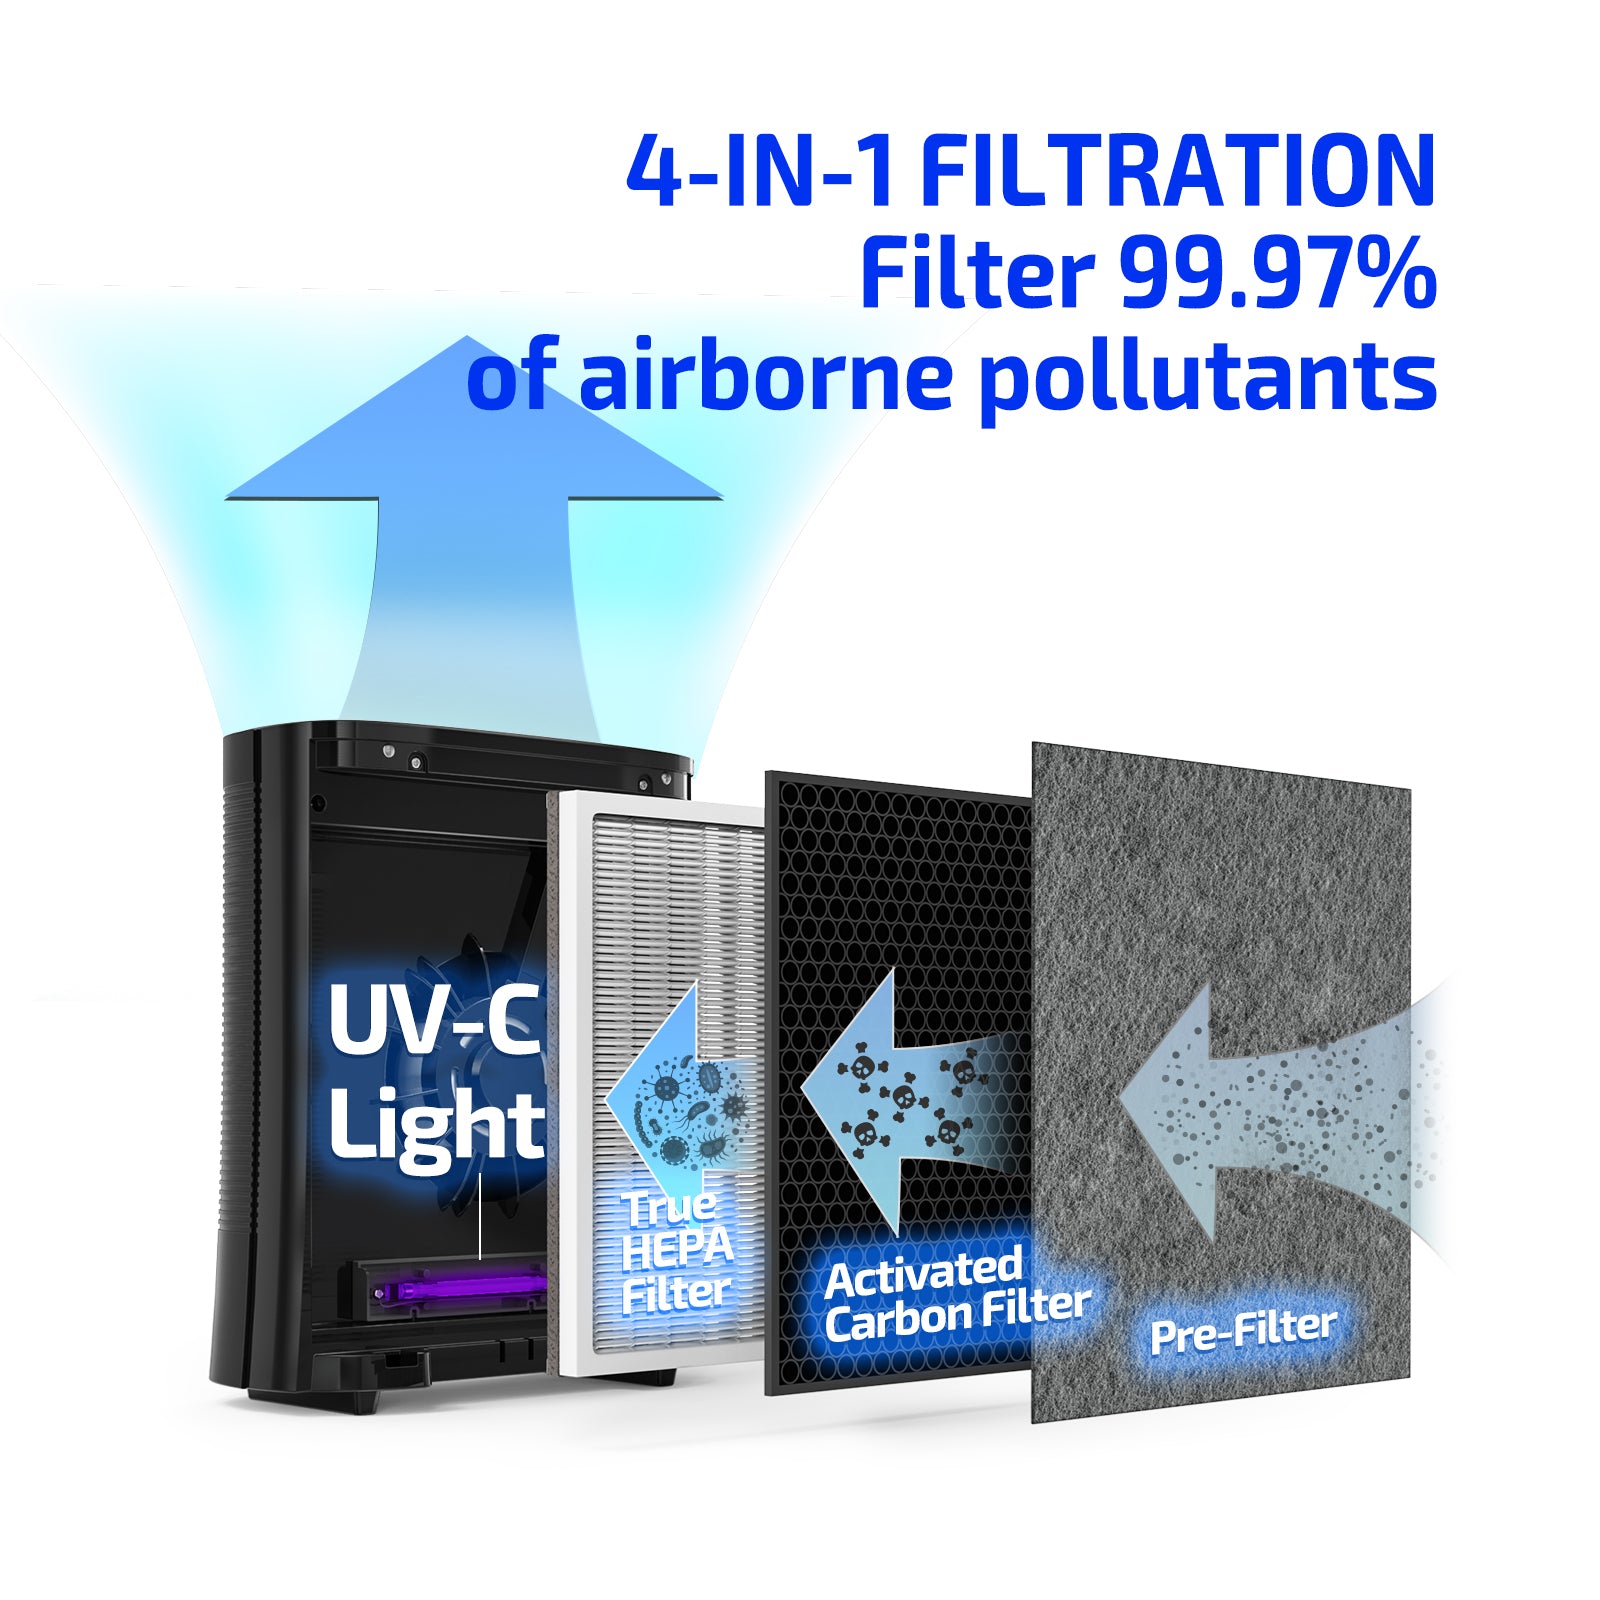 Air Purifiers AP010,with UV-C Light Sanitizer, Purifier with 3 in1 True HEPA Fits